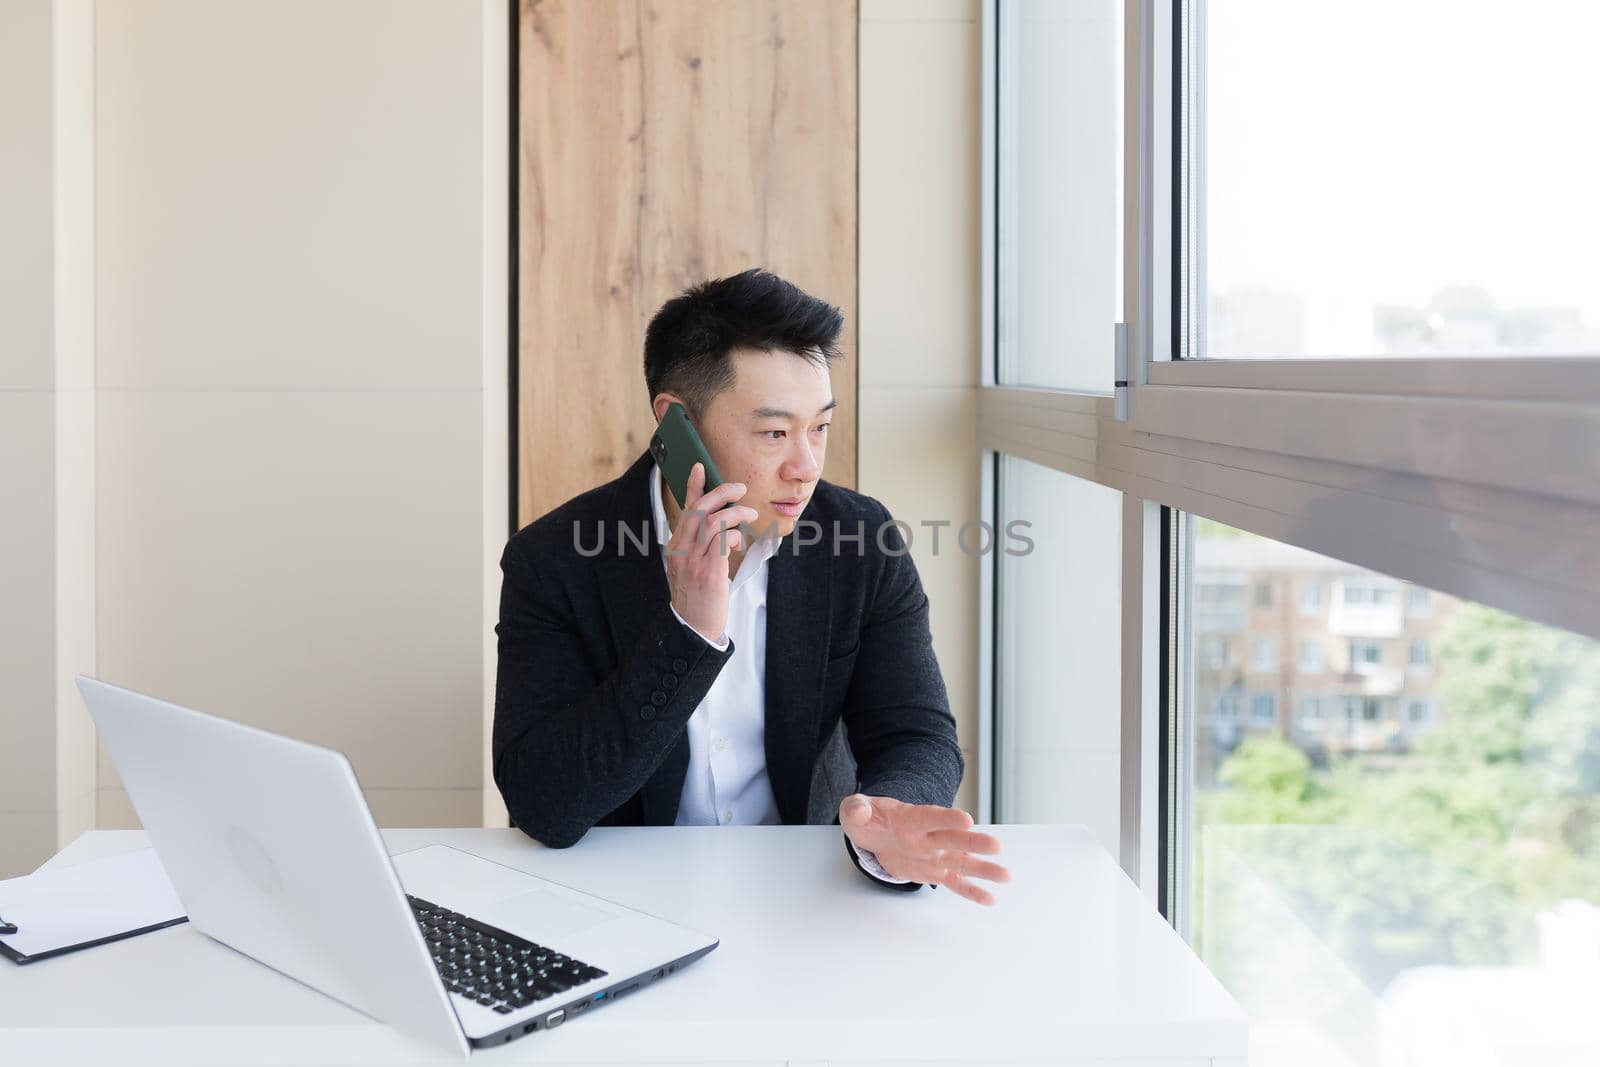 Serious asian business businessman uses cellphone to communicate with colleagues while sitting in modern office by voronaman